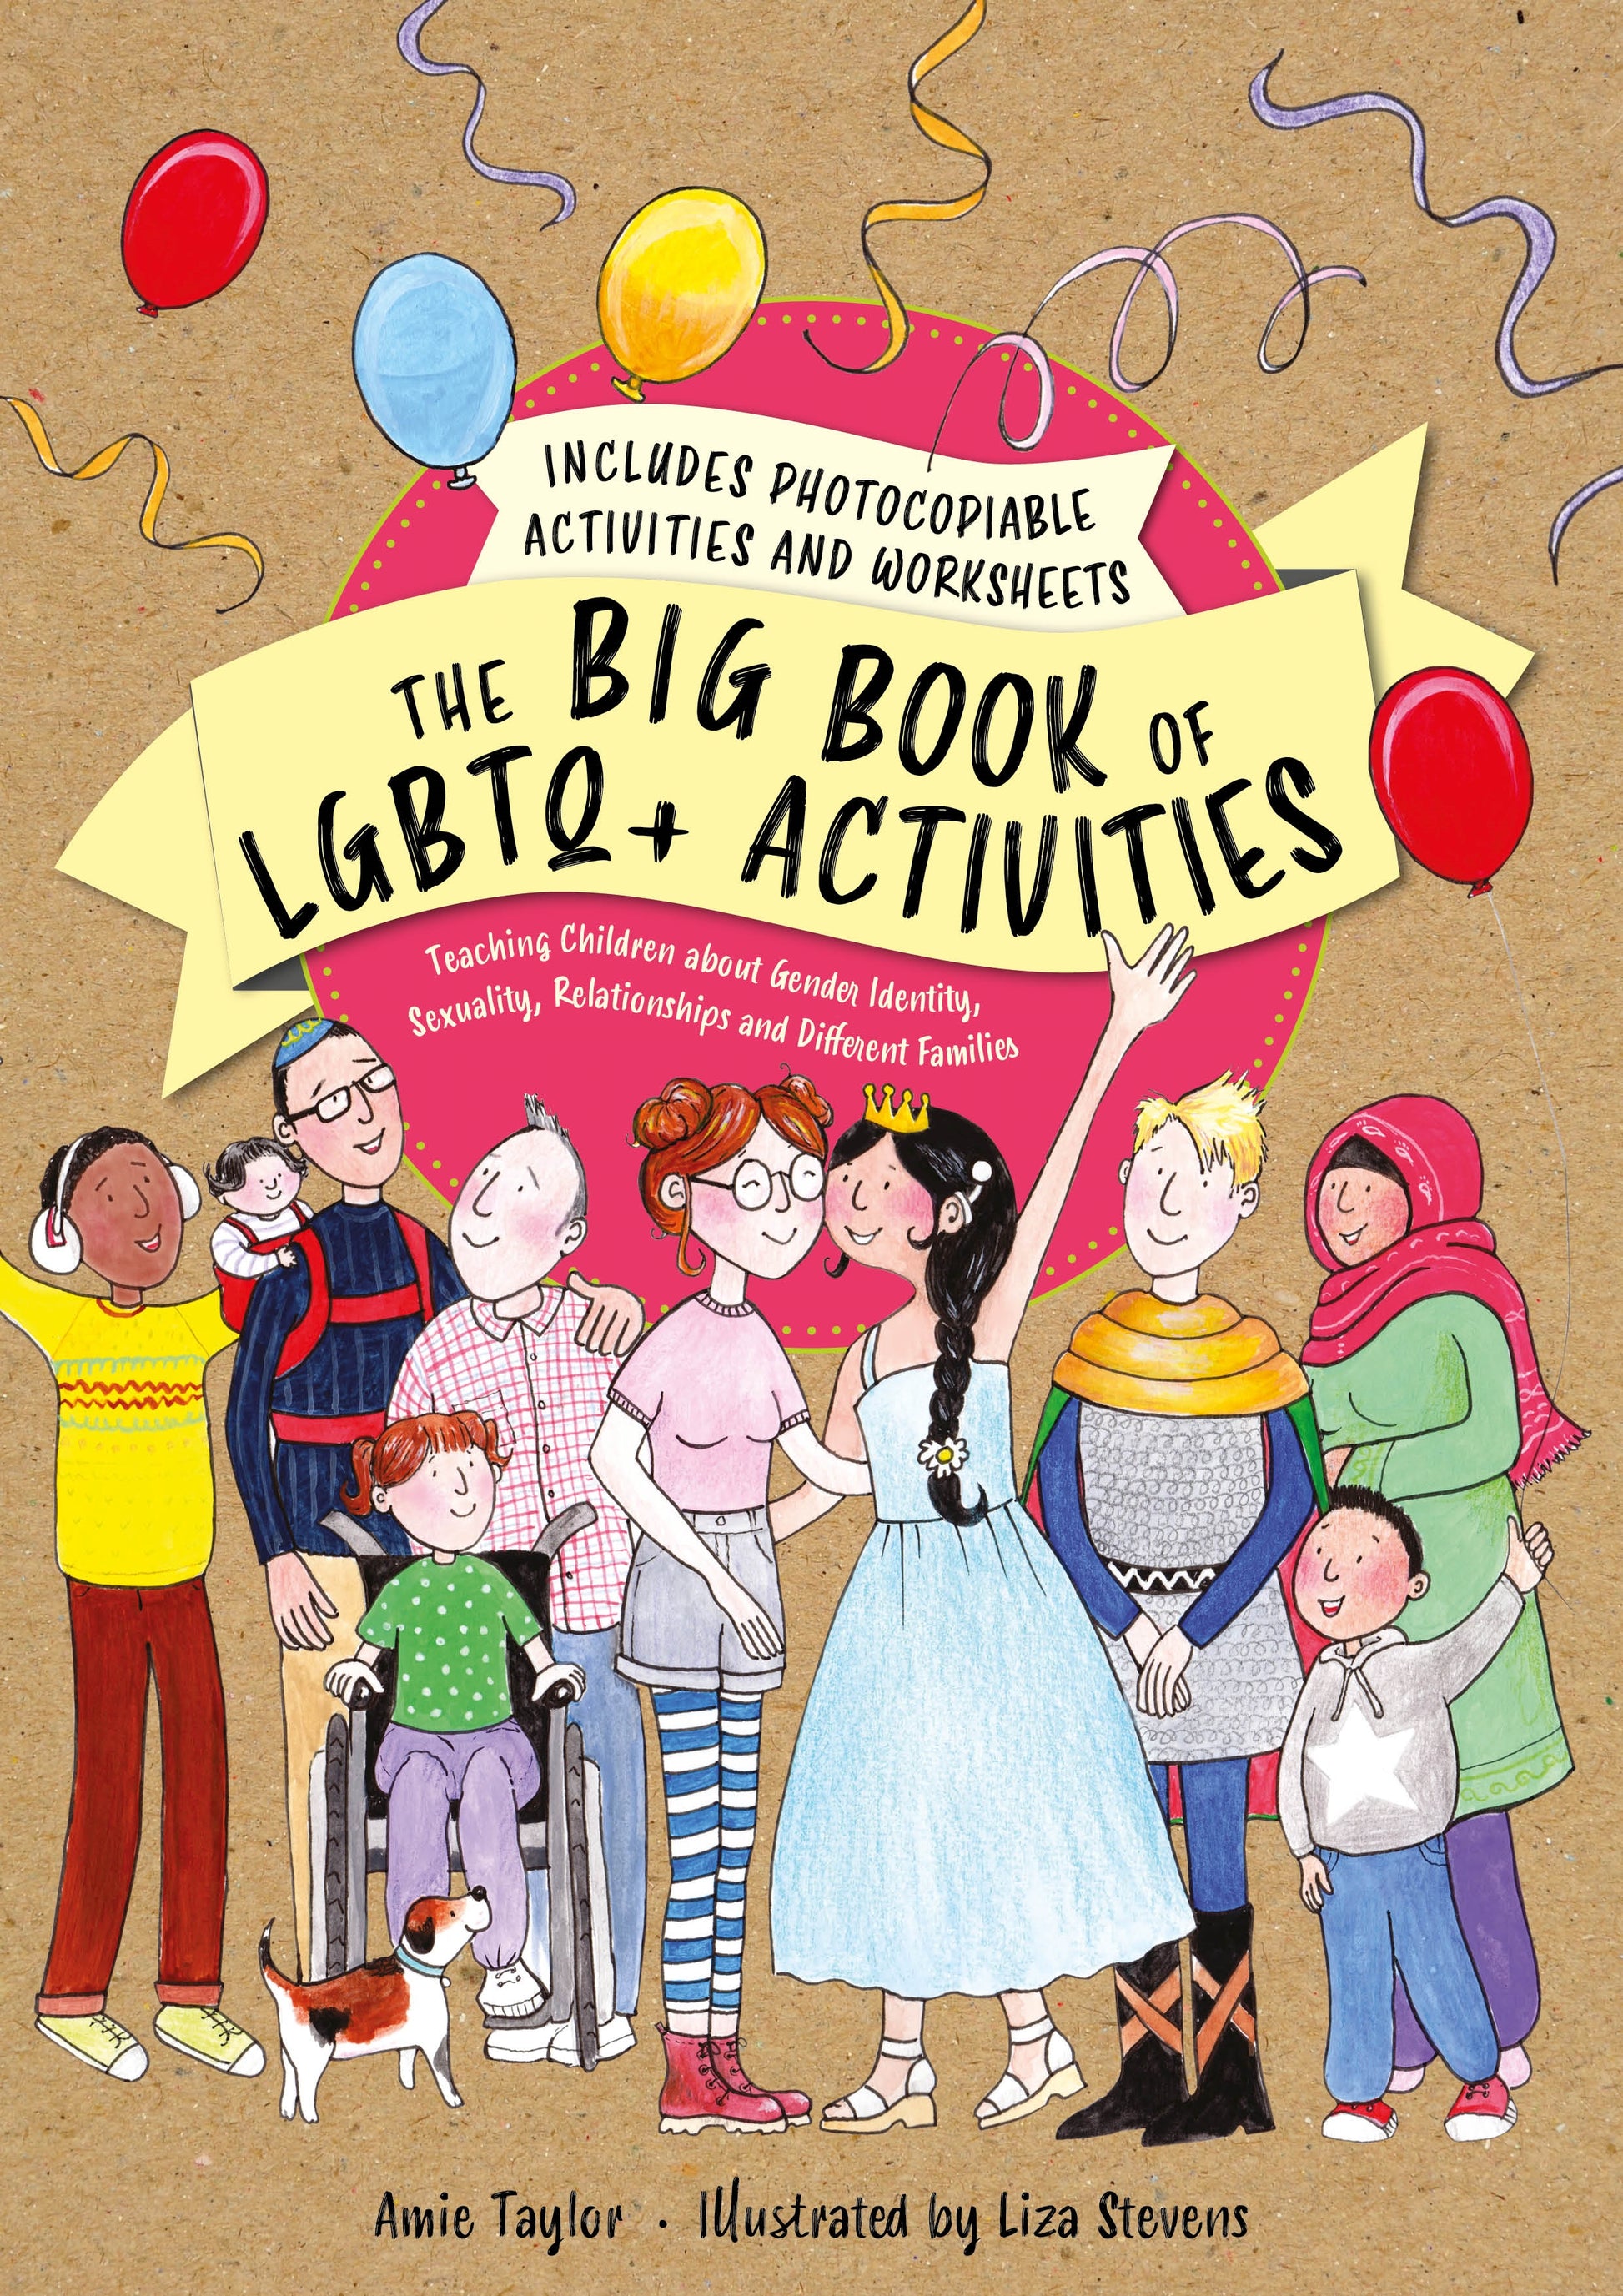 The Big Book of LGBTQ+ Activities by Amie Taylor, Liza Stevens